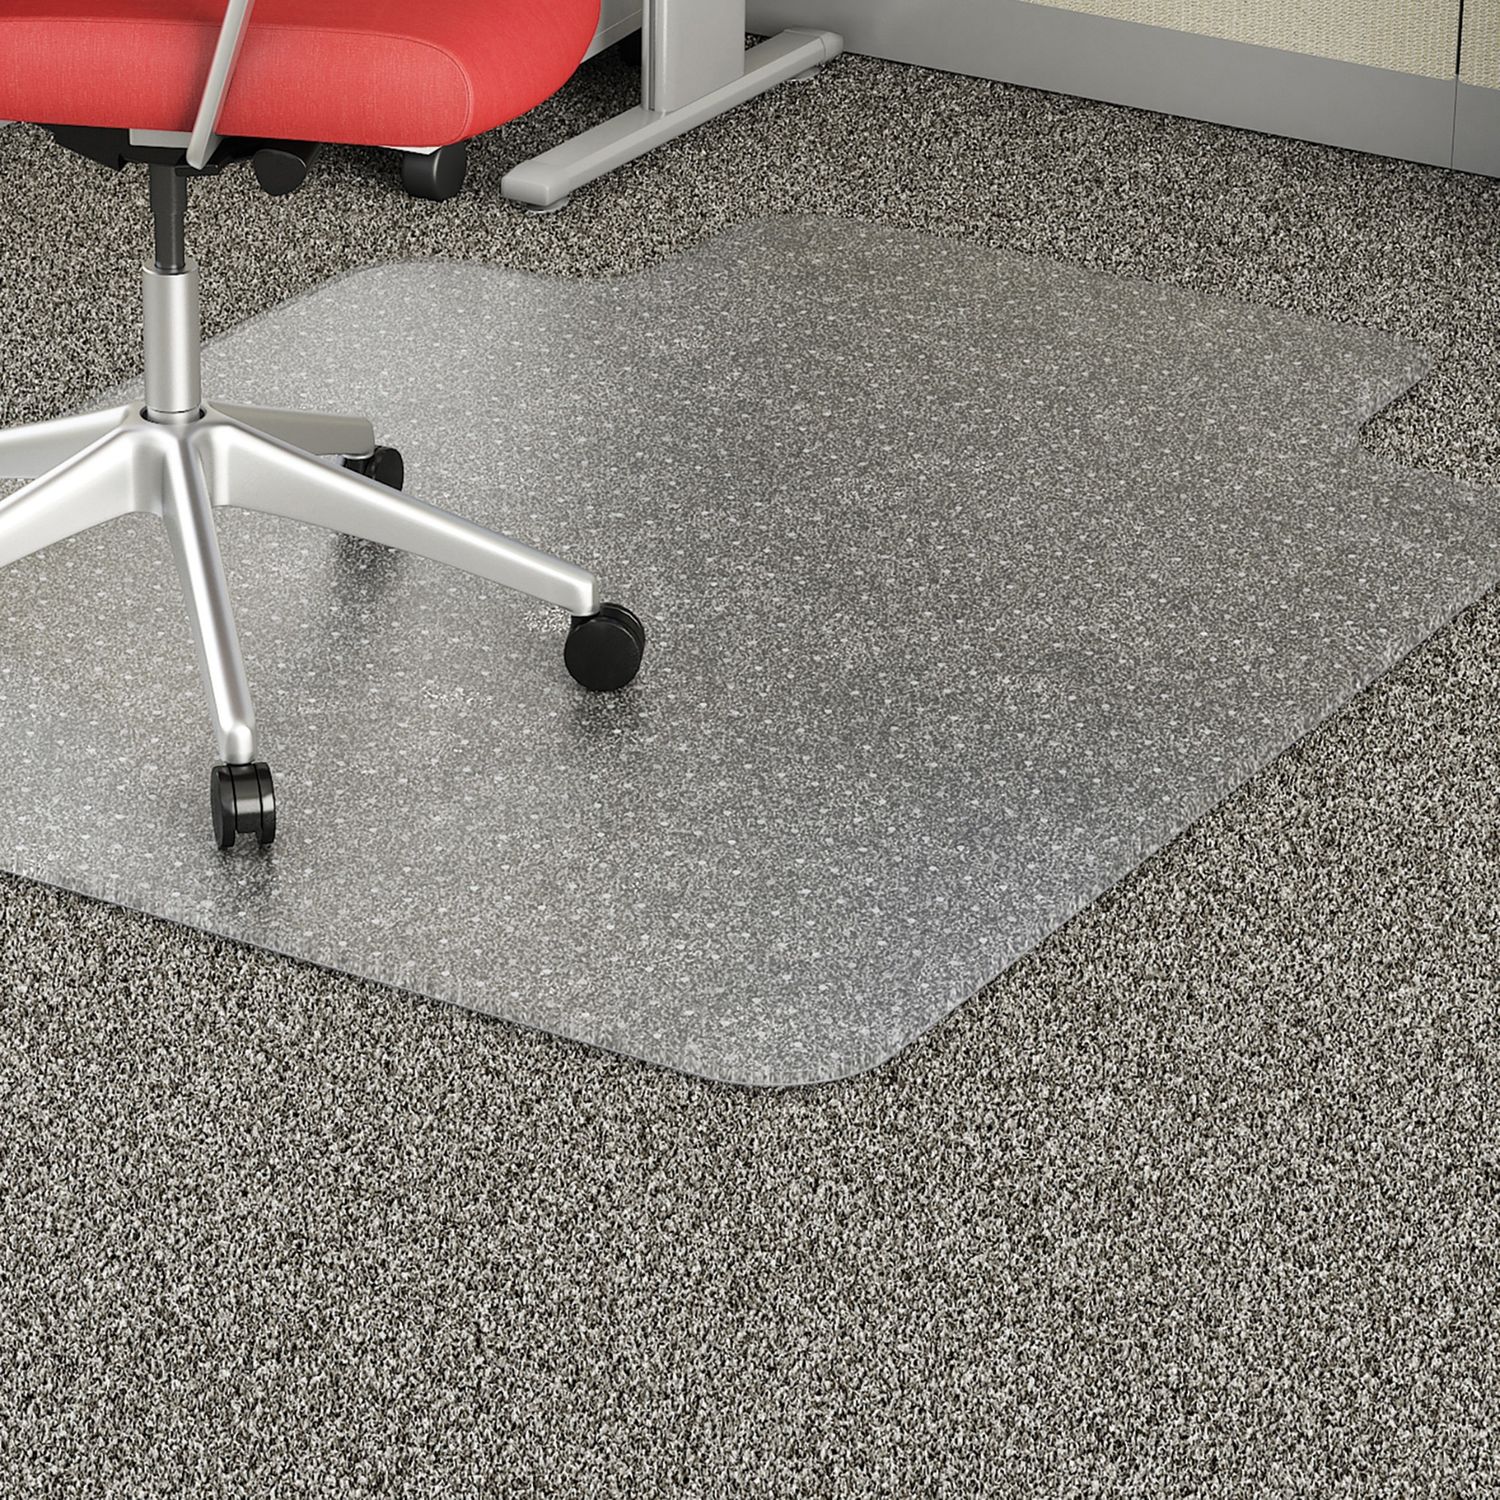 Economy Low Pile Standard Lip Chairmat Carpeted Floor, 48" Length x 36" Width x 95 mil Thickness, Lip Size 10" Length x 19" Width, Rectangle, Vinyl, Clear